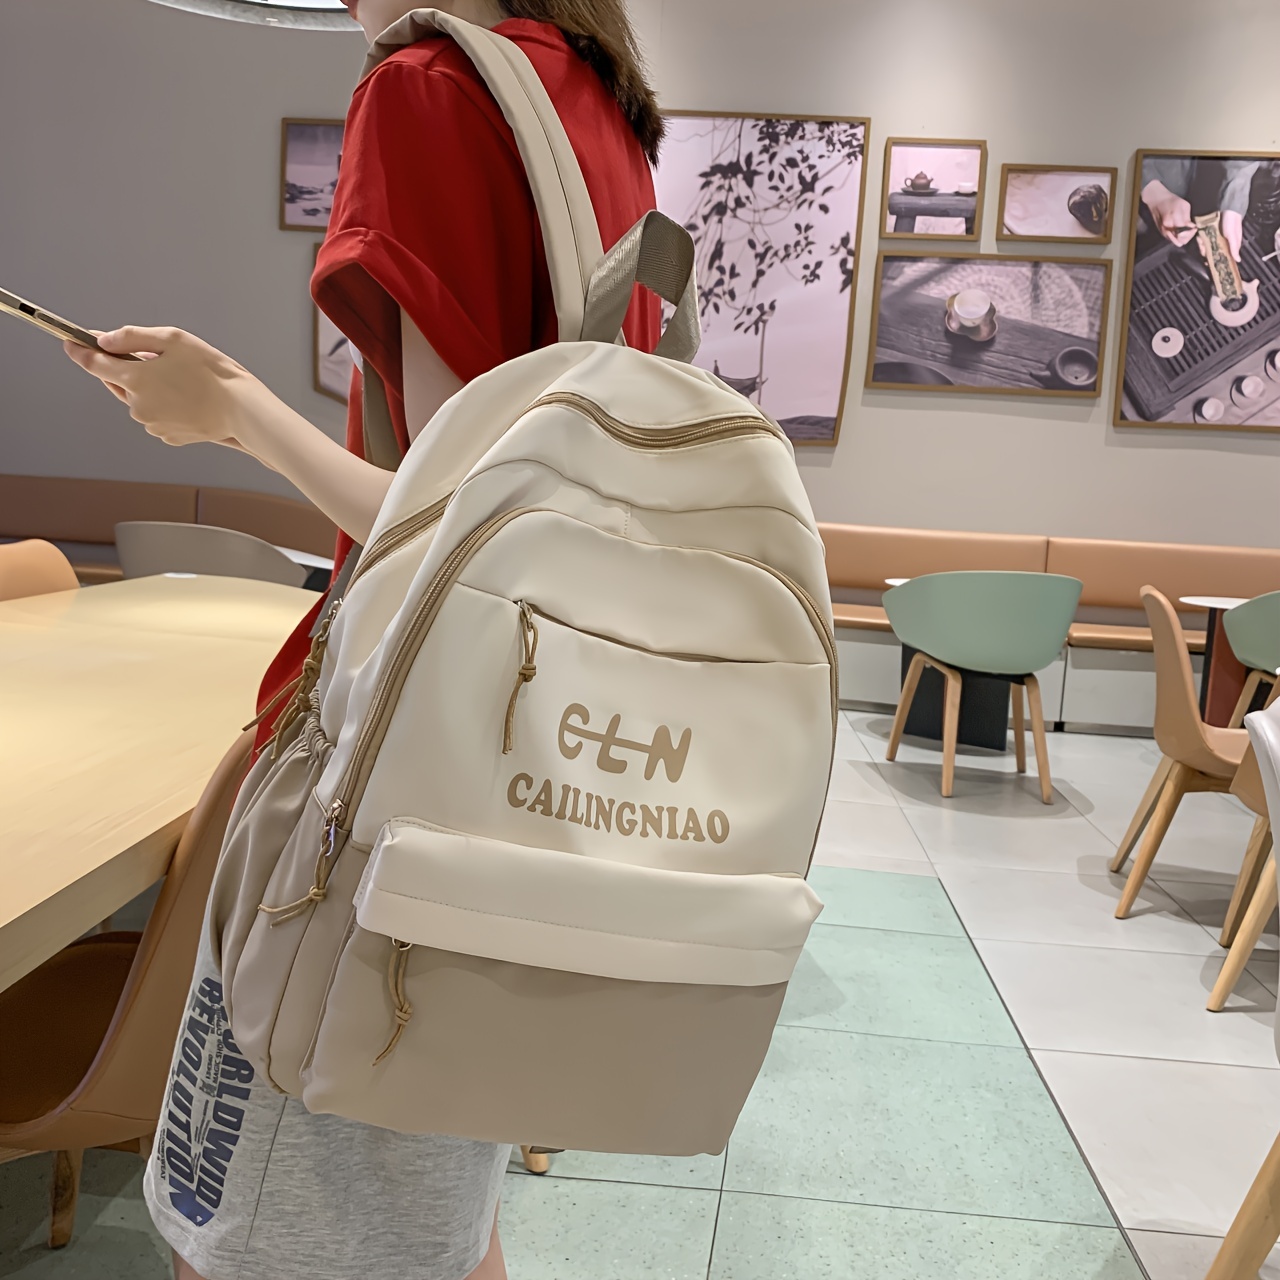 Simple Color Contrast Large Capacity Preppy Backpack, Nylon Lightweight  School Campus Daypack, Fashion Travel Commuter Bag - Temu Bahrain